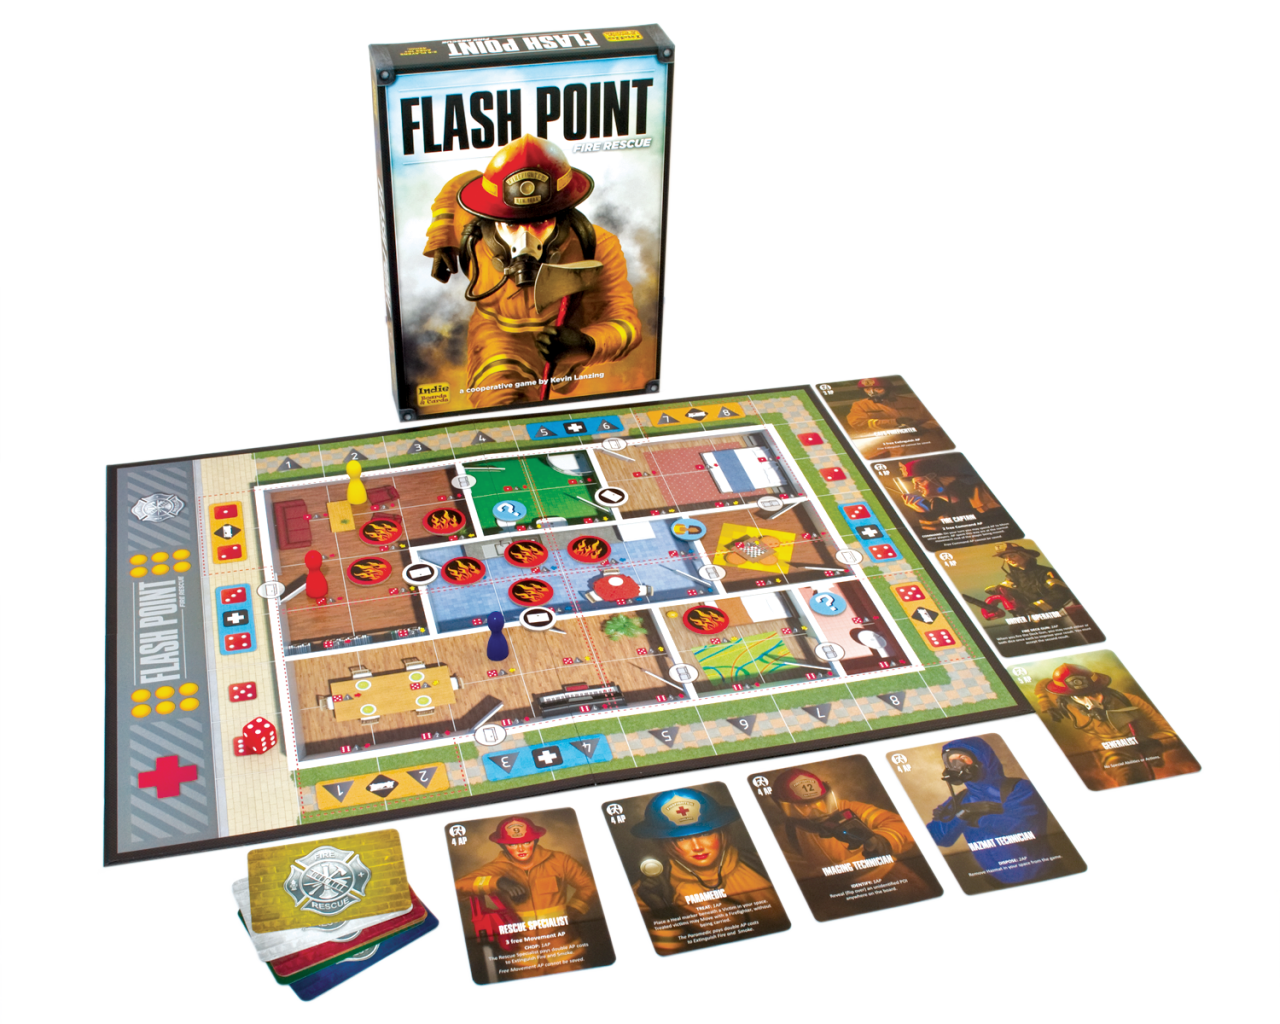 Flash Point Fire Rescue Board Game, $39 - Flash Point: Fire Rescue (1280x1024)